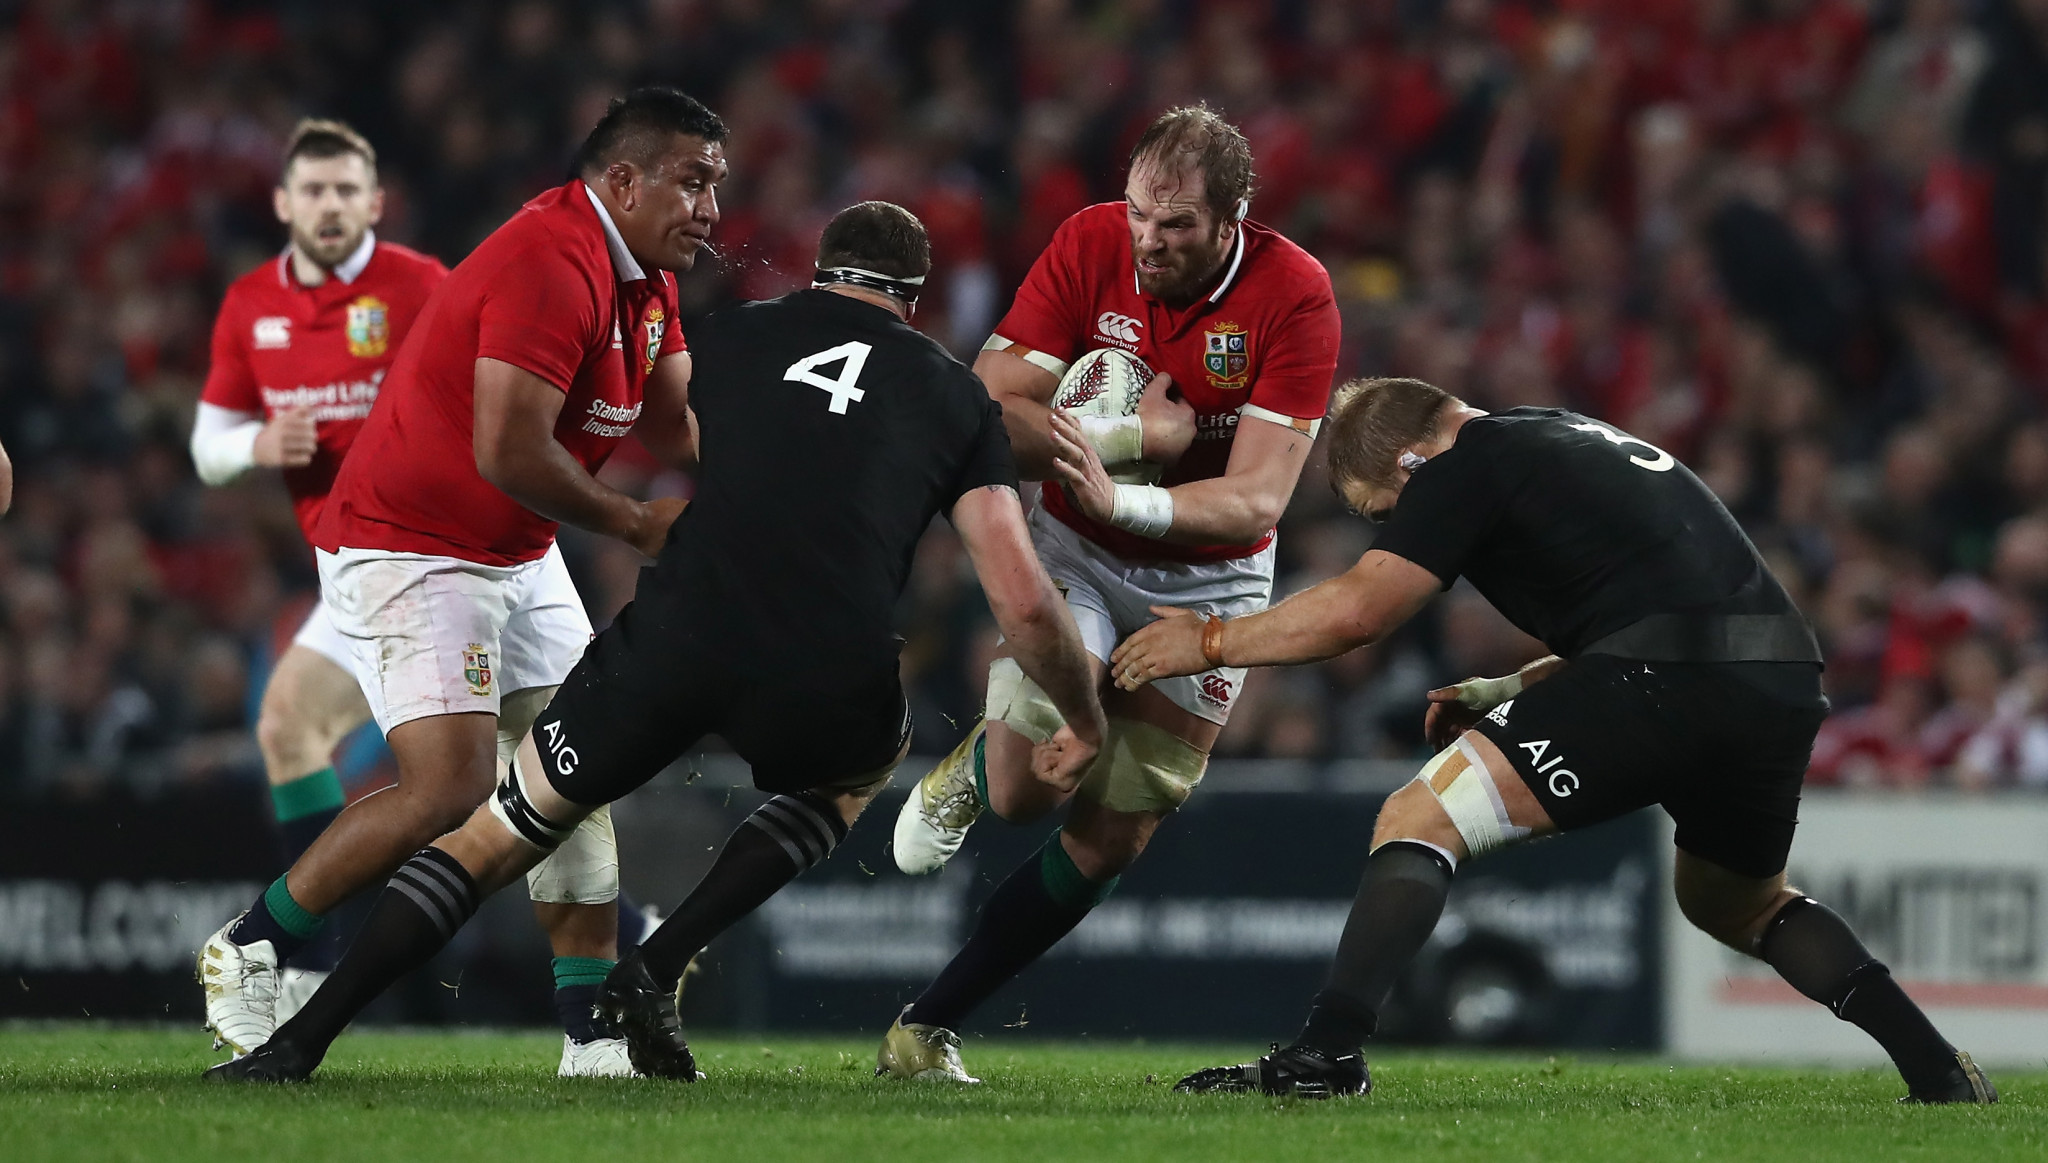 The British and Irish Lions face playing all their matches in South Africa without spectators in attendance ©Getty Images